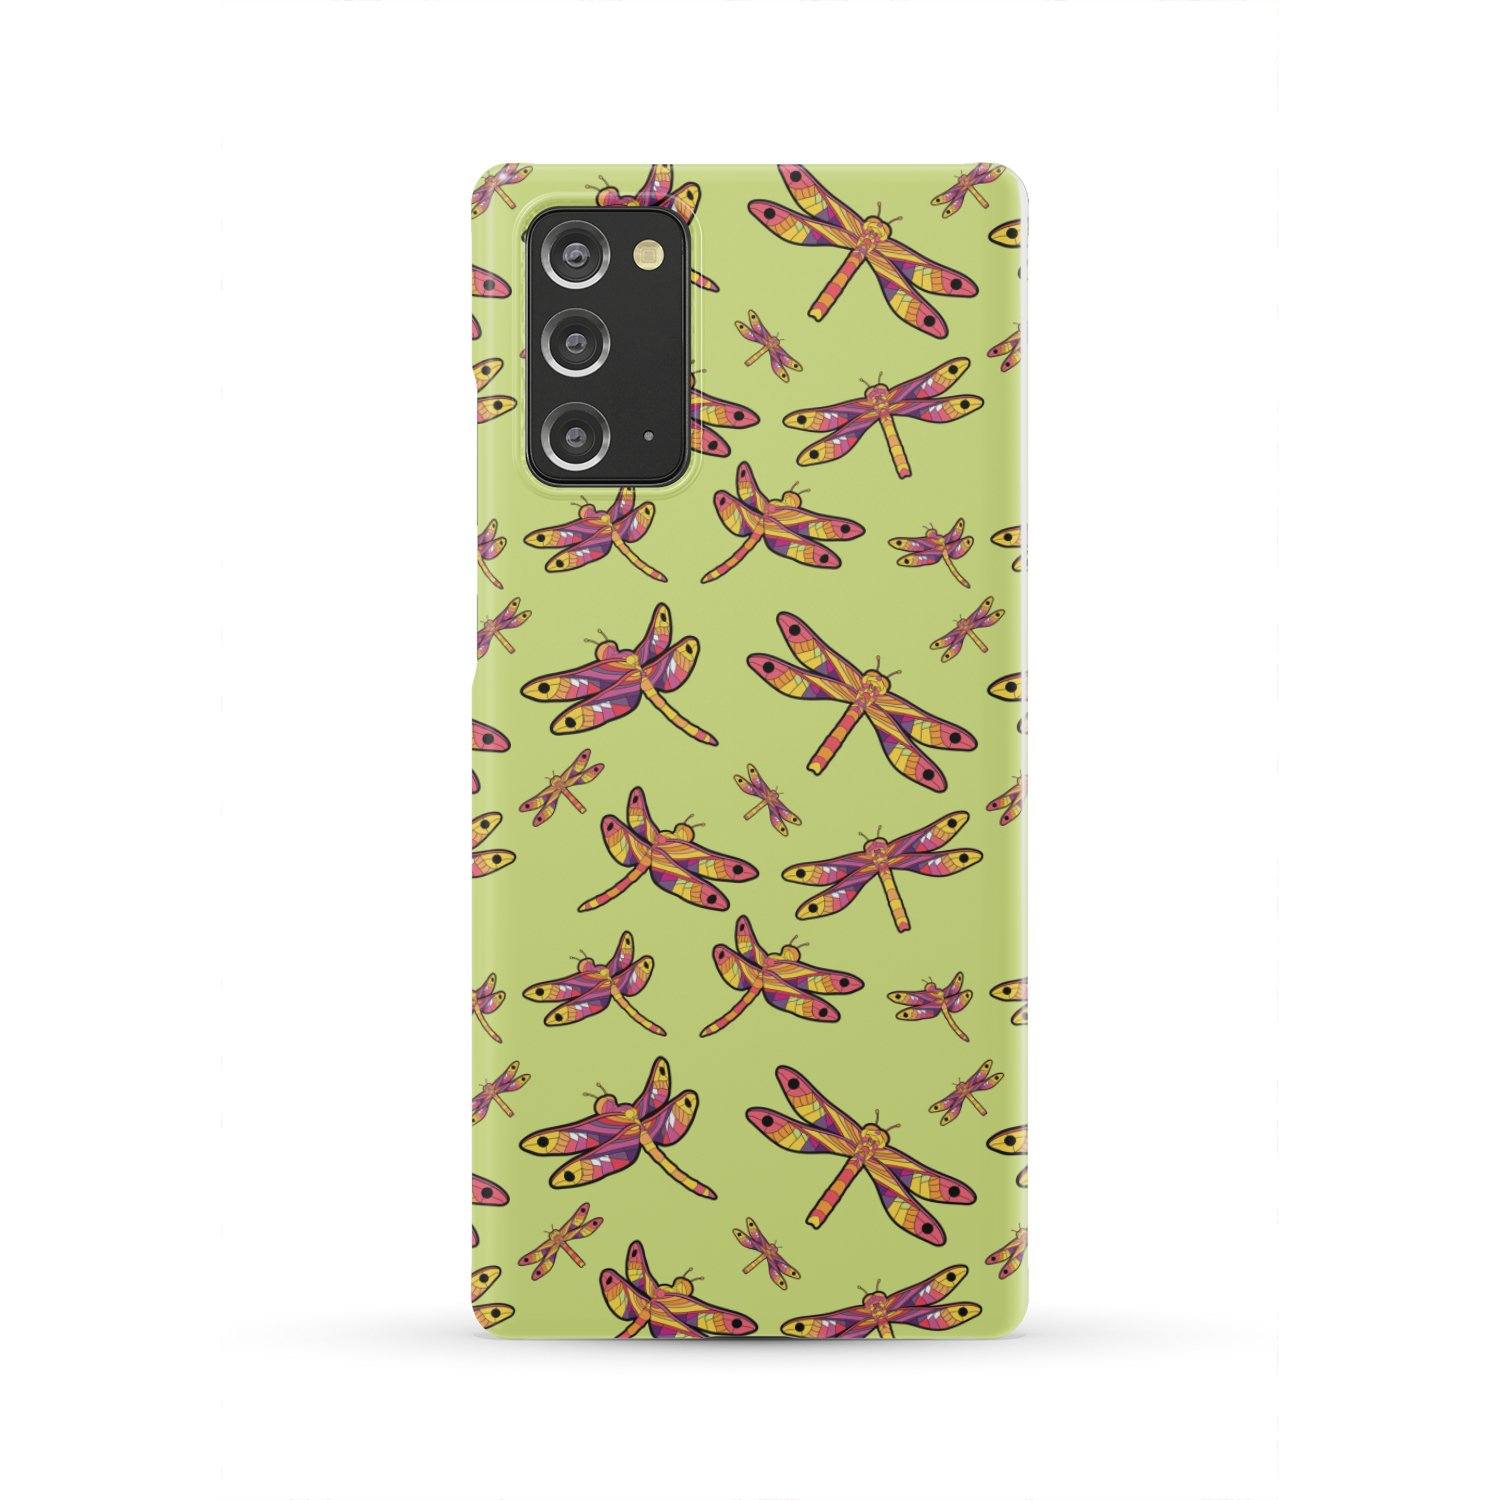 Gathering Lime Phone Case Phone Case wc-fulfillment Samsung Galaxy Note 20 